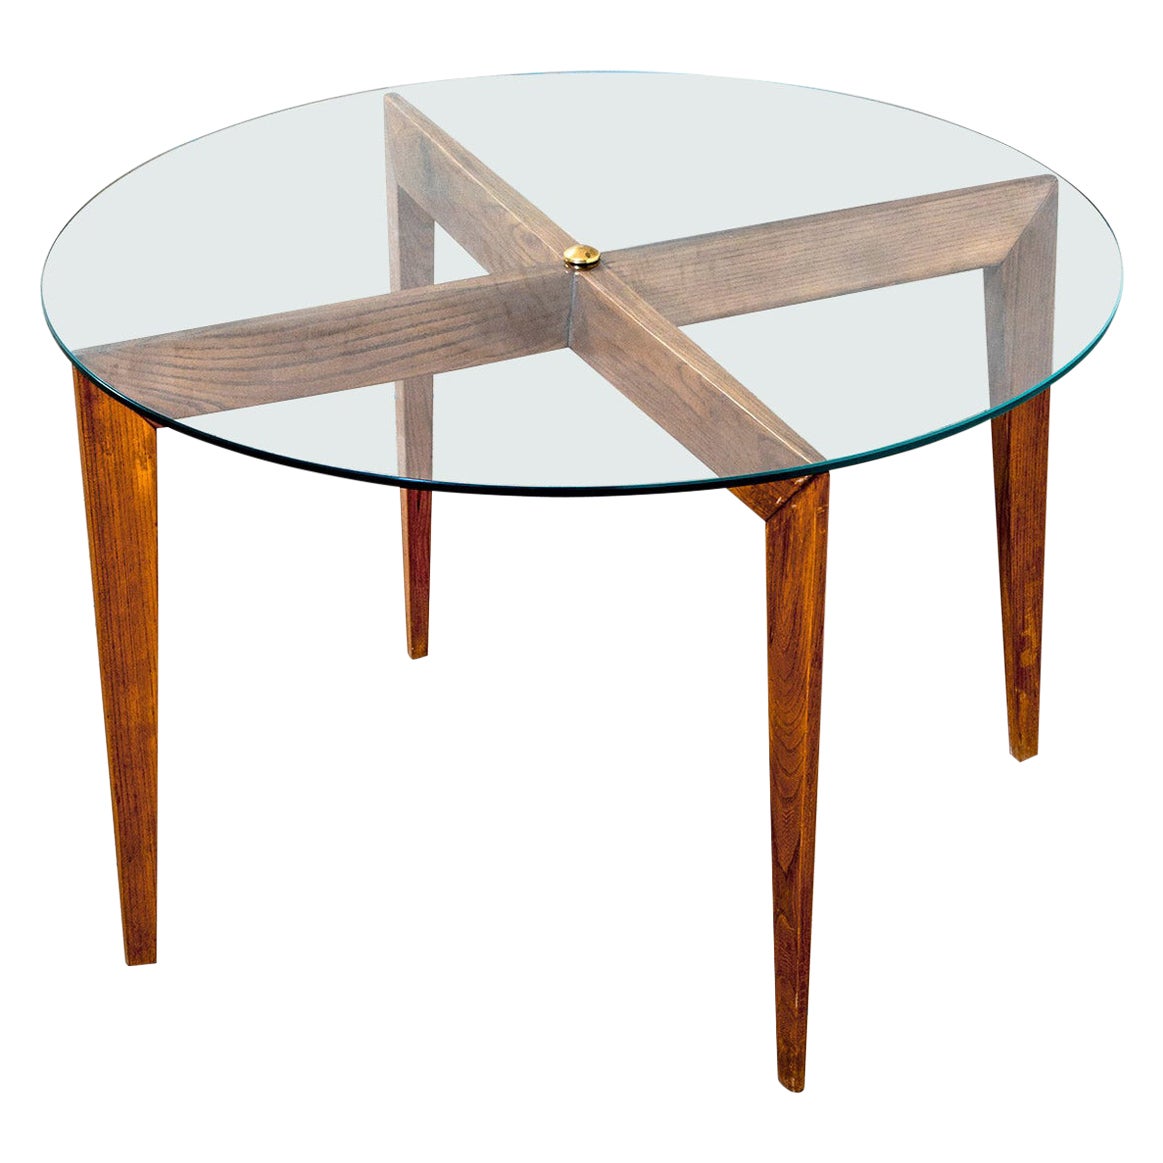 20th Century Gio Ponti Coffee Table for Isa Bergamo in Wood with Round Glass Top